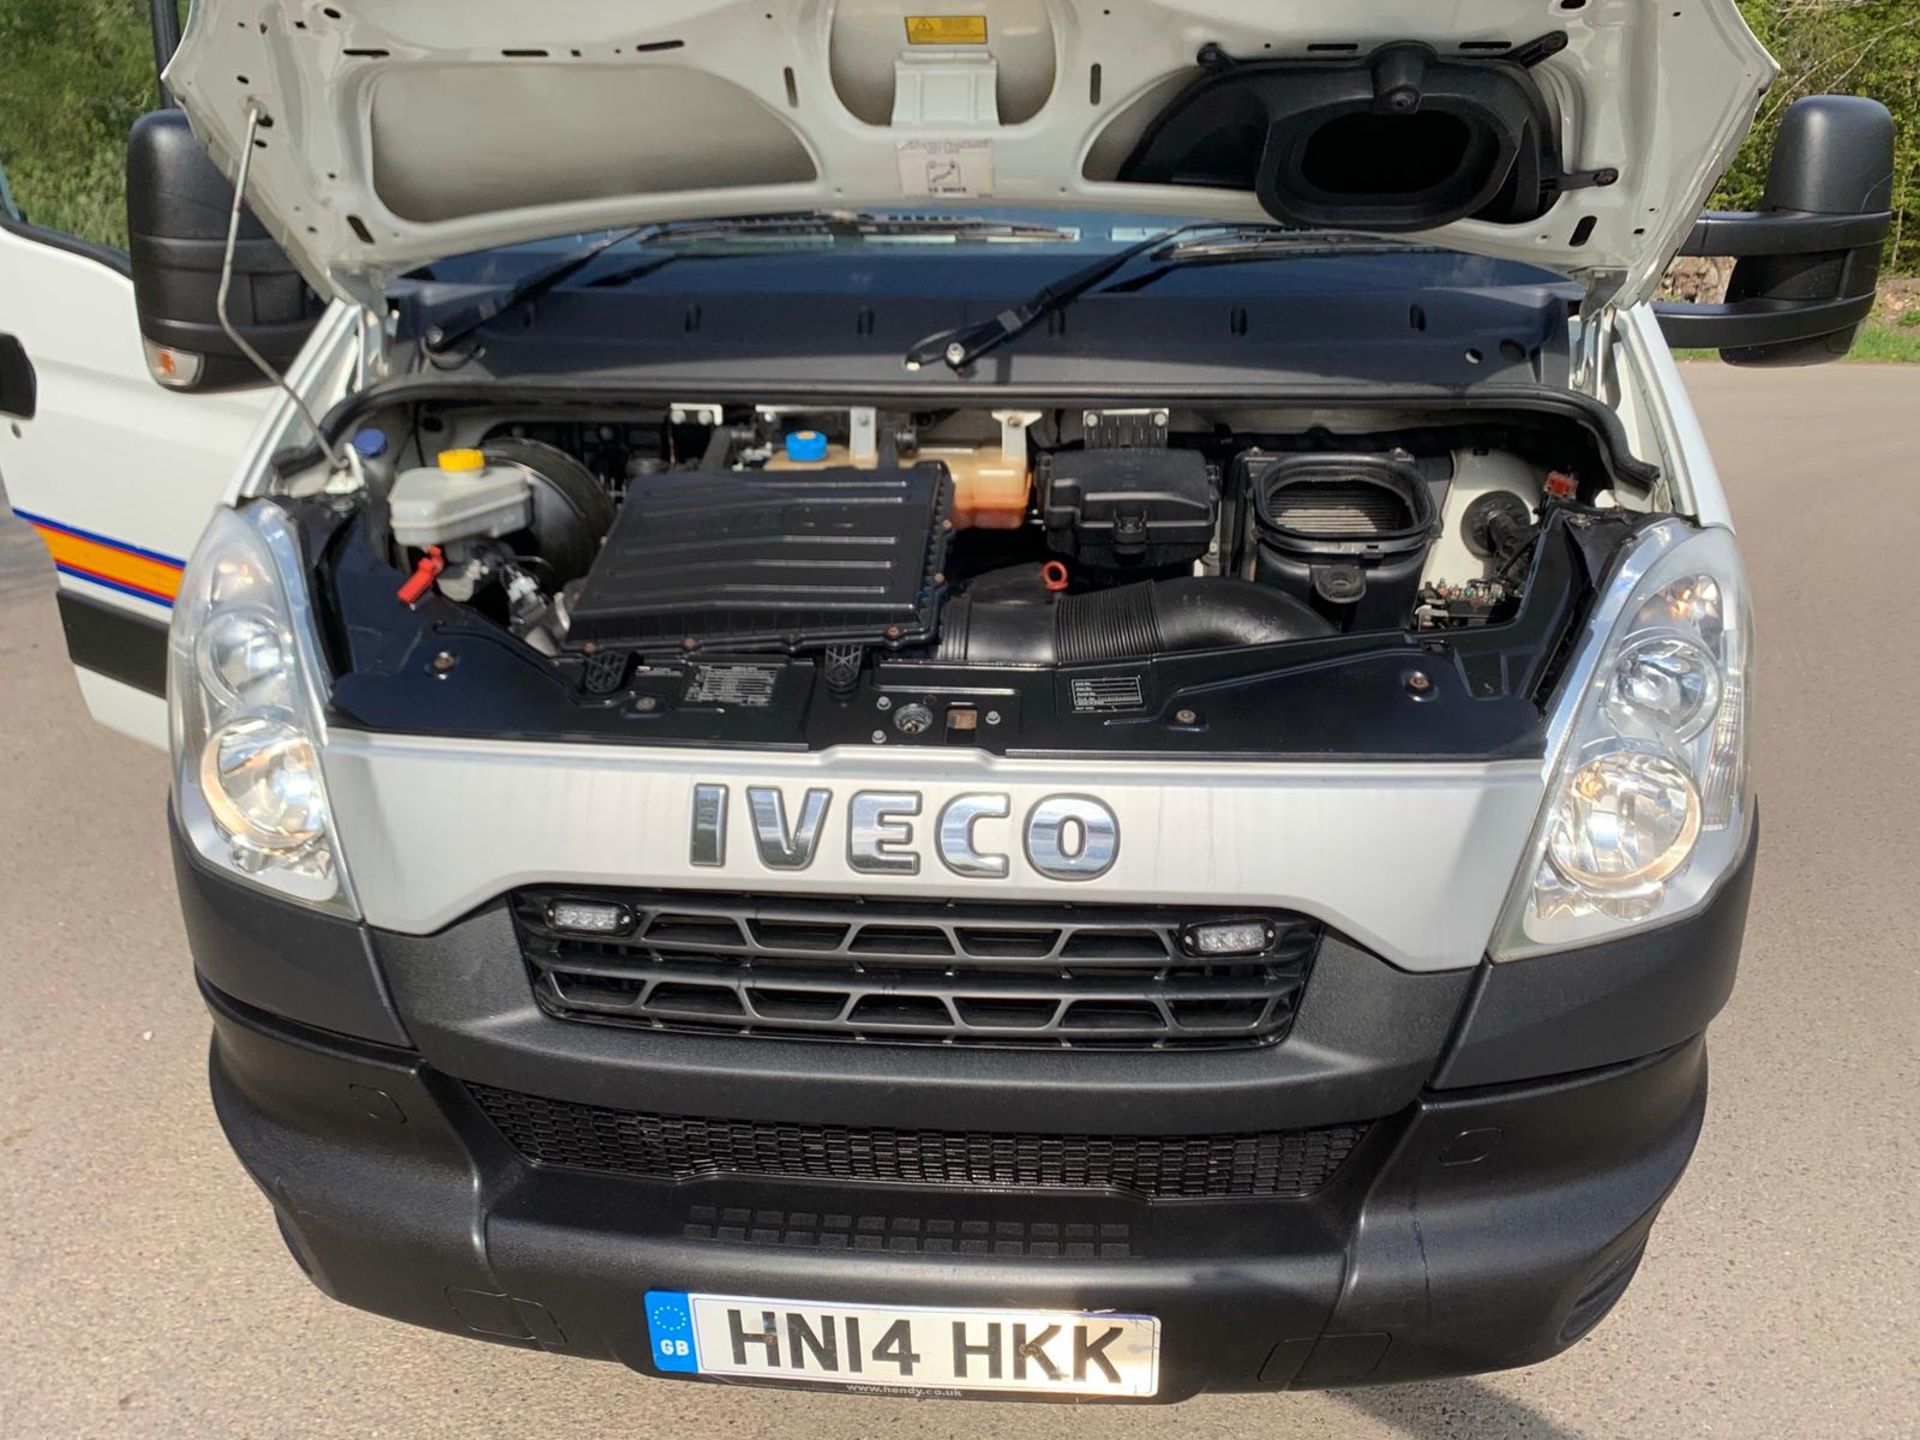 2014 IVECO DAILY 70C17 TILT & SLIDE RECOVERY, 3.0 DIESEL ENGINE, SHOWING 0 PREVIOUS KEEPERS - Image 13 of 19